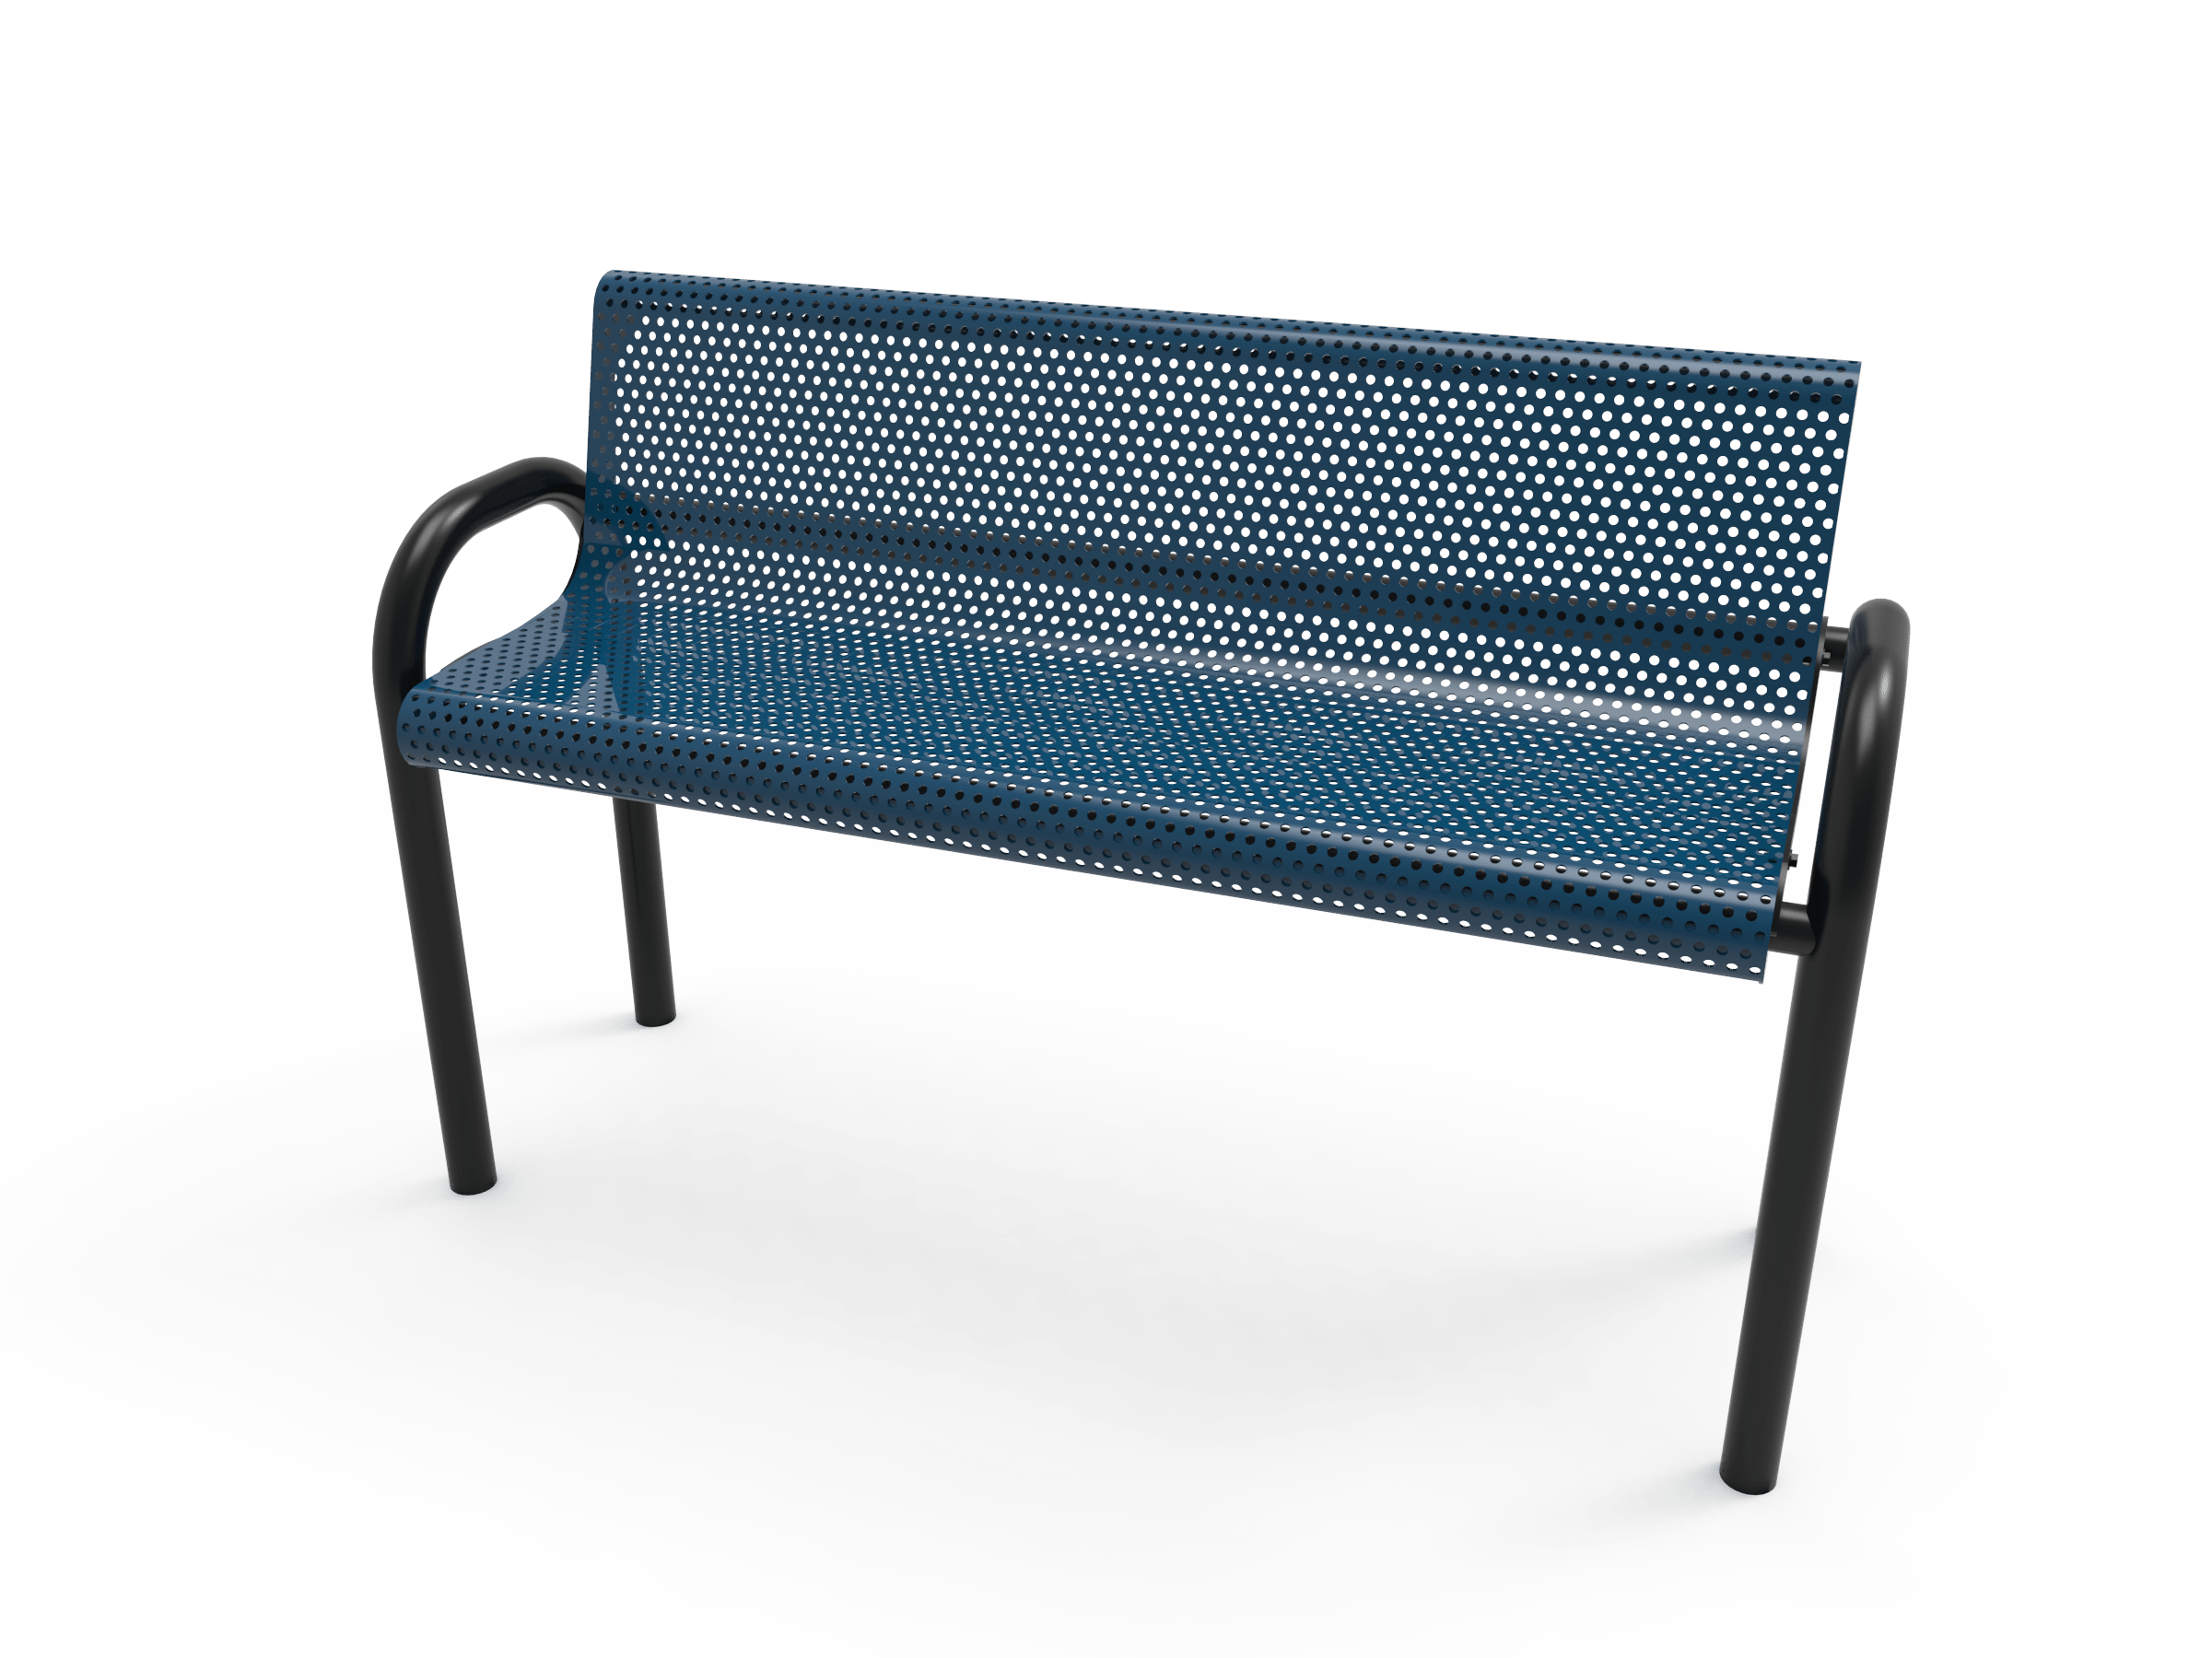 4′ Bench With Back In Ground-Punched
BMD04-D-53-000
Industry Standard Finish
$1229.00
BMD04-B-53-000
Advantage Premium Finish
$1529.00
